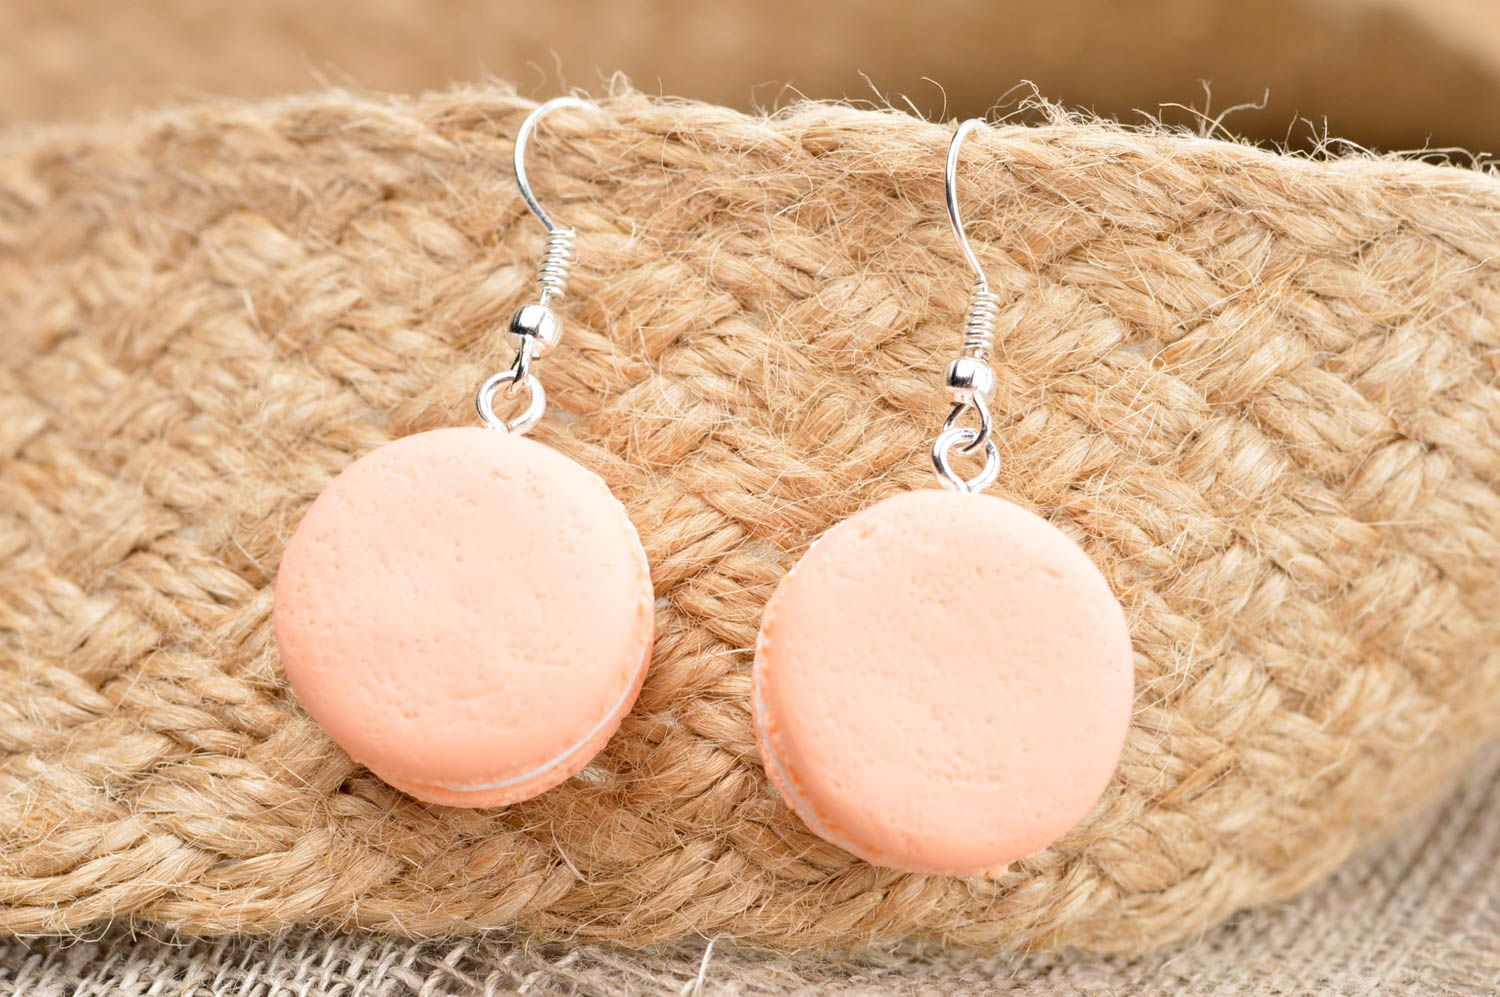 Handmade earrings designer accessory clay jewelry gift idea earrings with charms photo 1